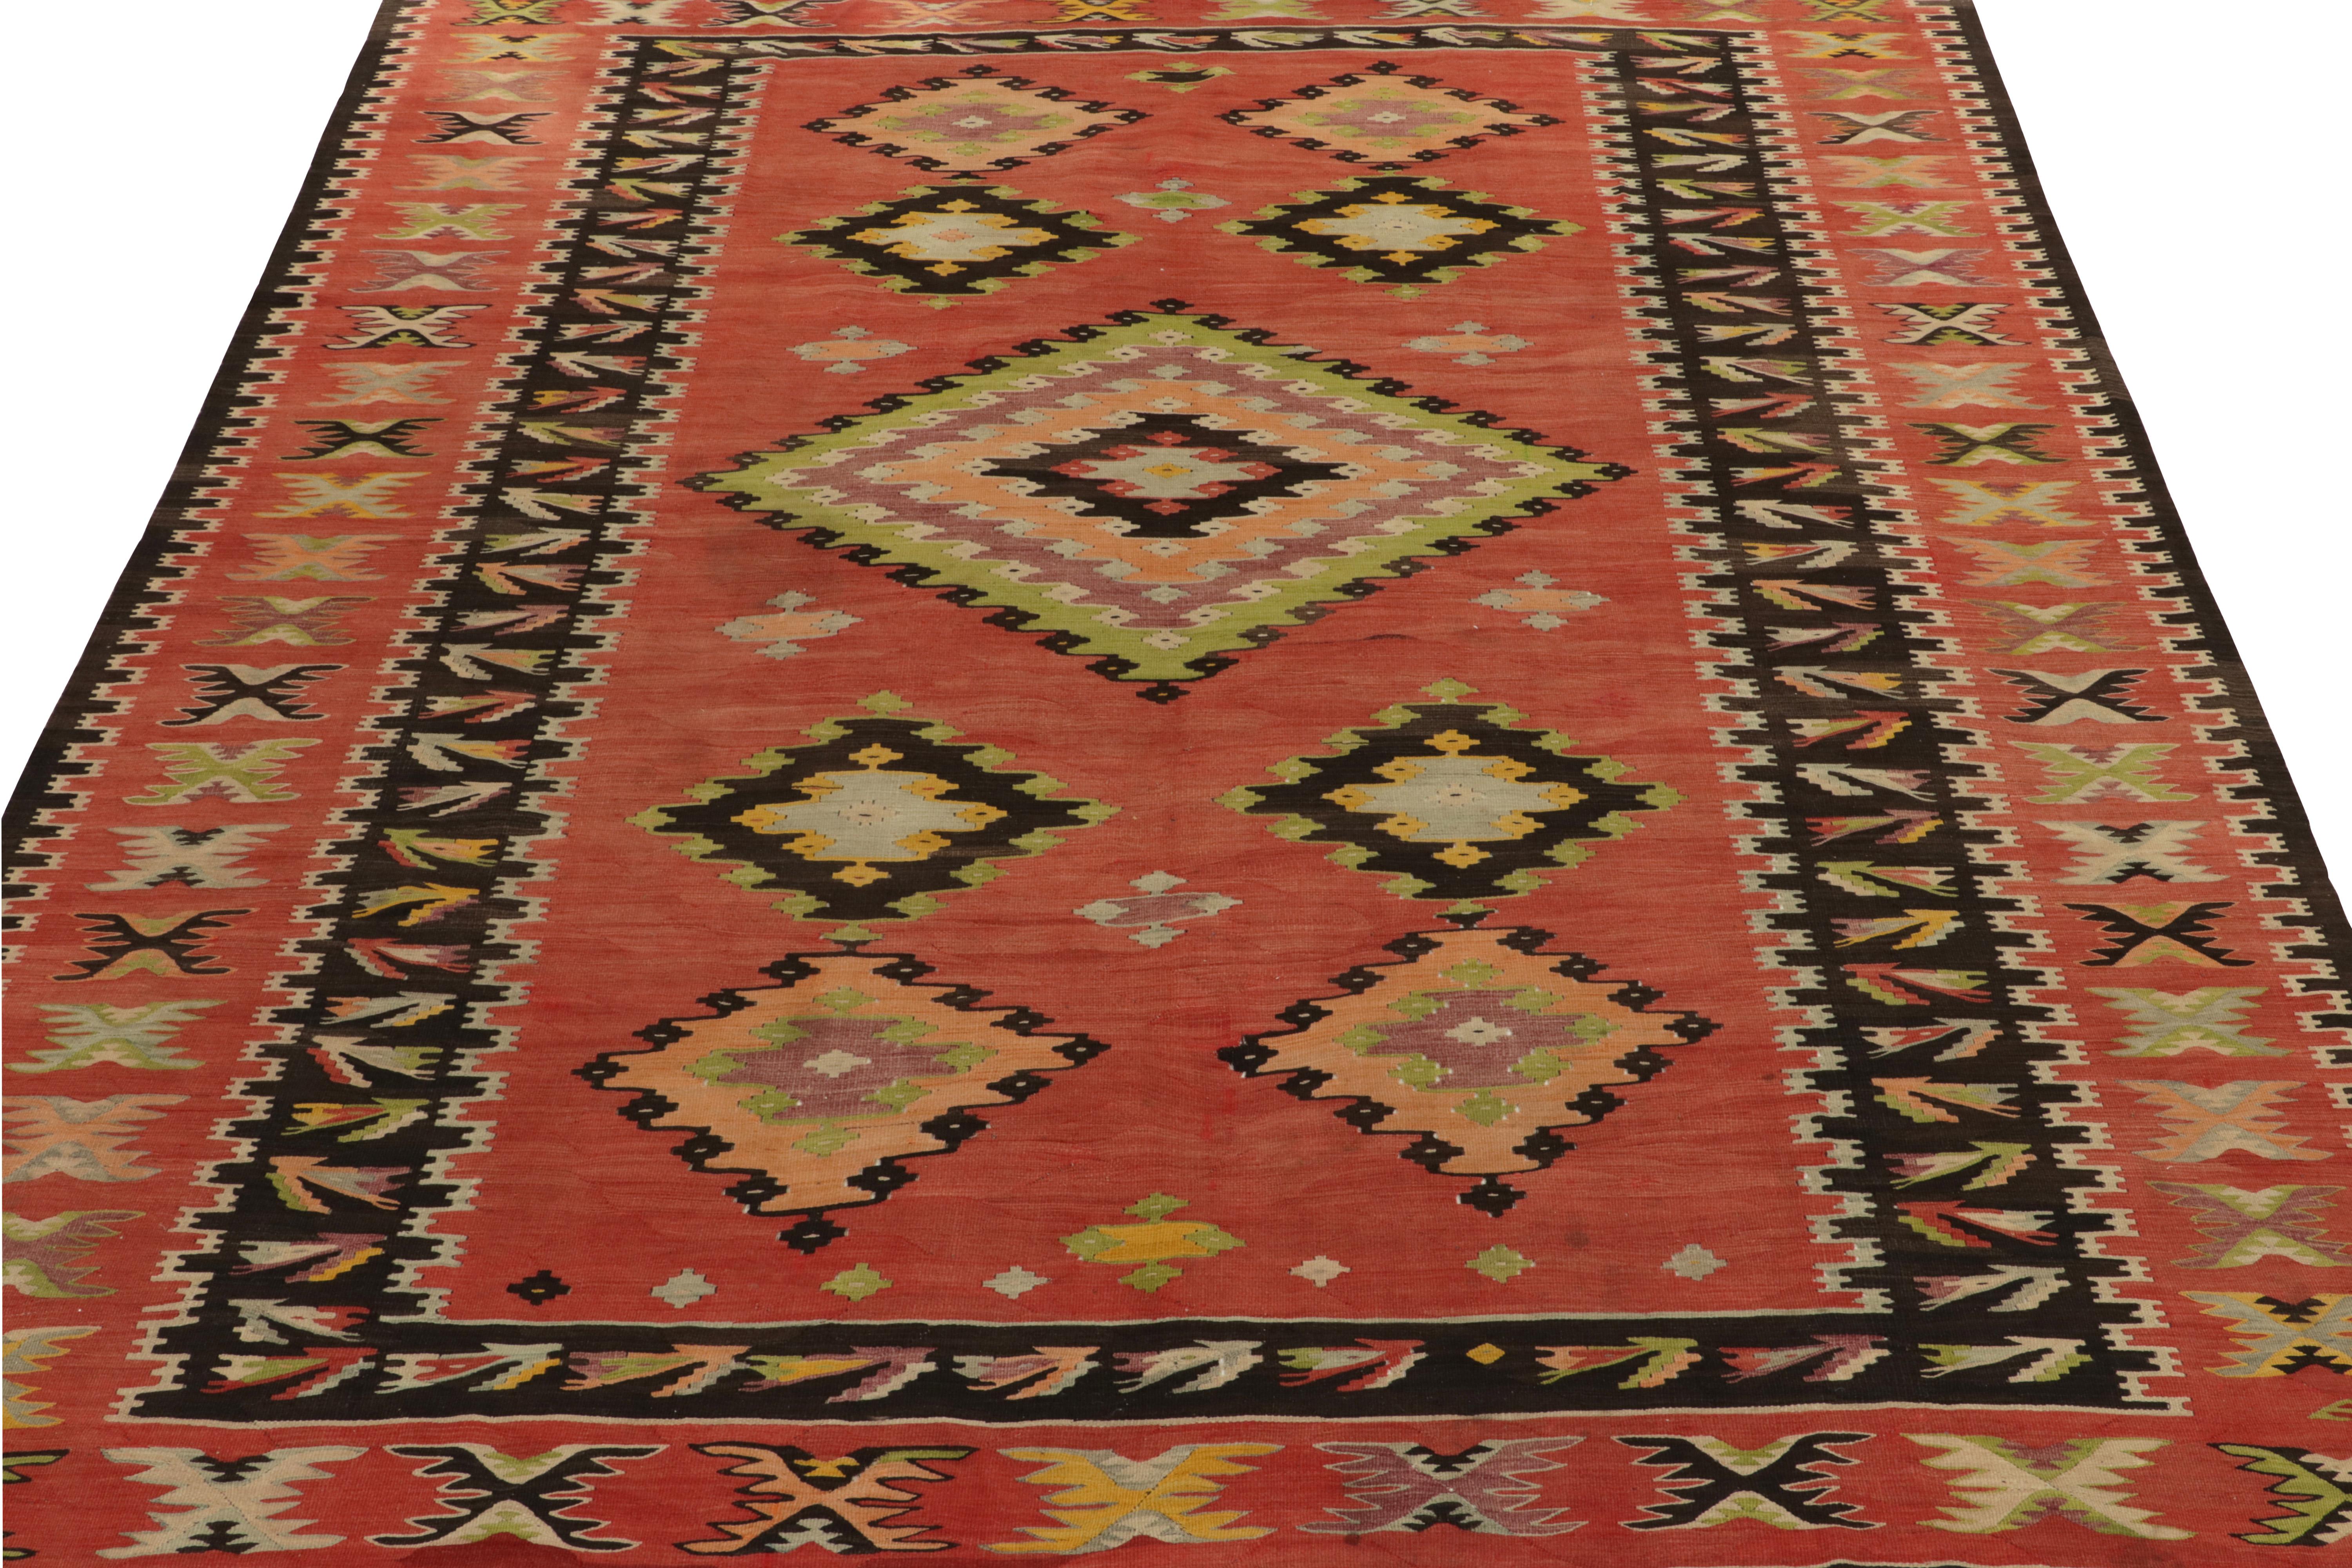 Turkish Handwoven Vintage Kilim in Red, Brown and Green Medallion Pattern by Rug & Kilim For Sale